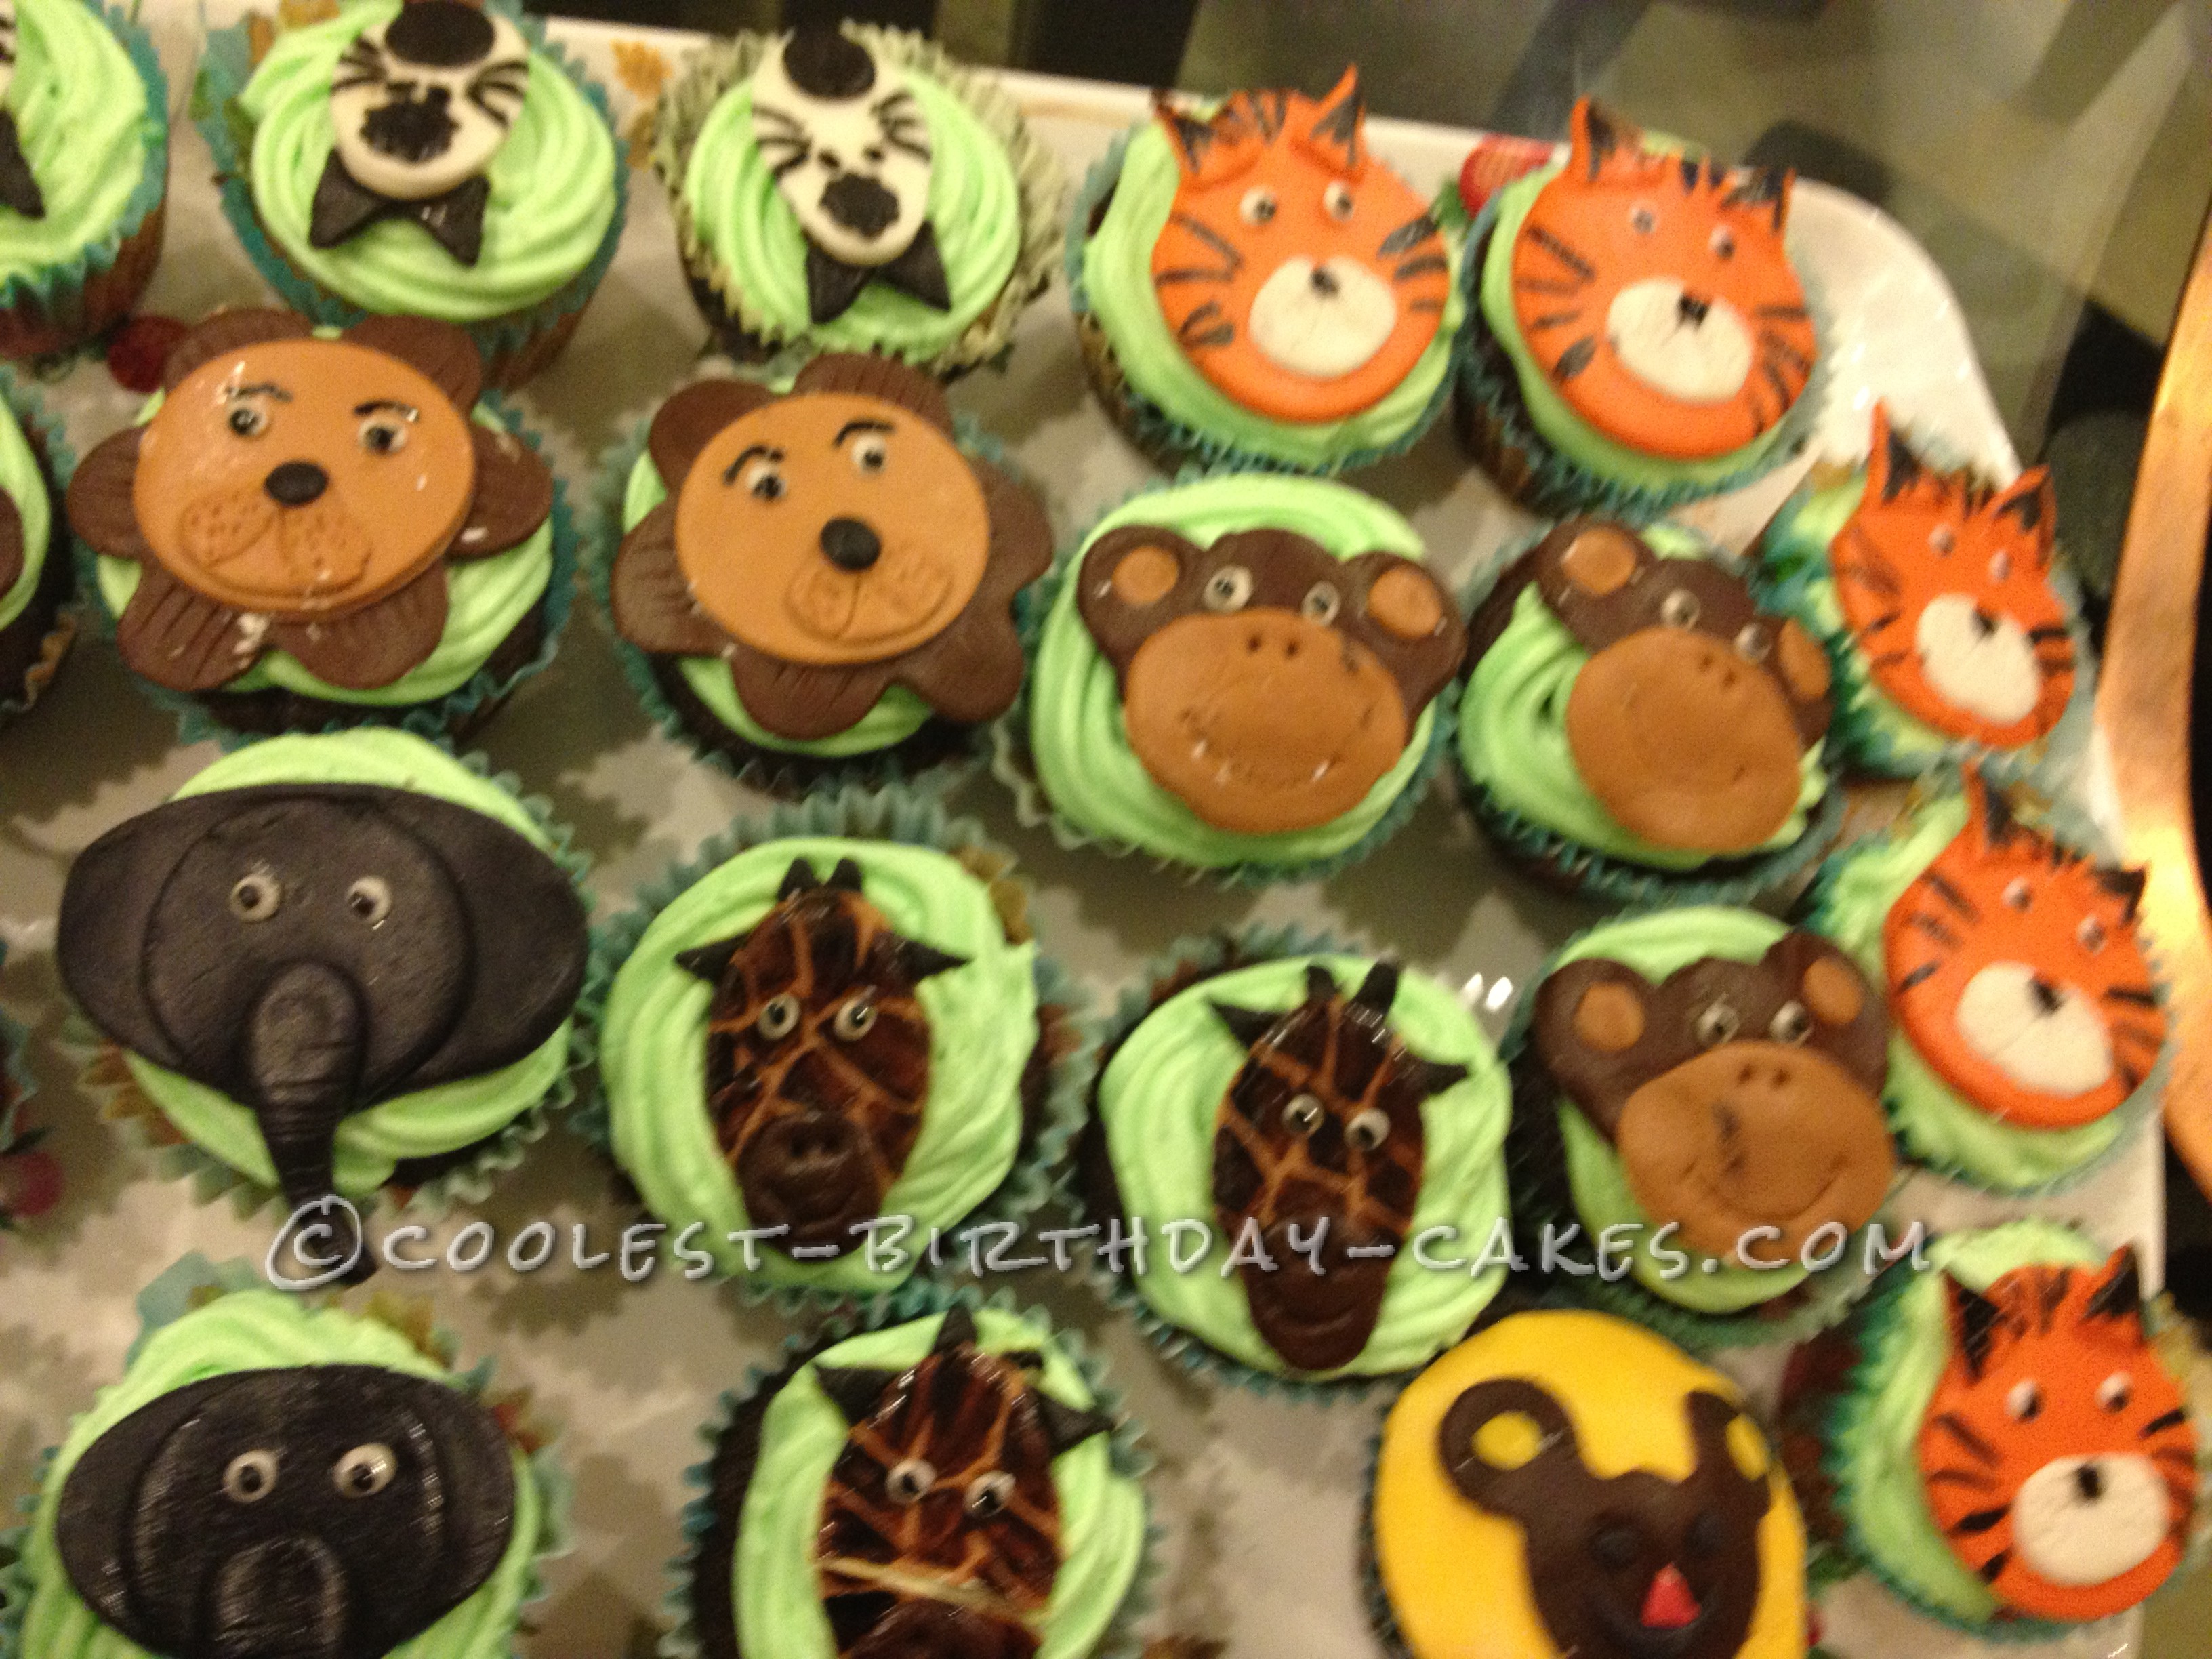 Coolest Jungle Day Birthday Cake and Cupcakes